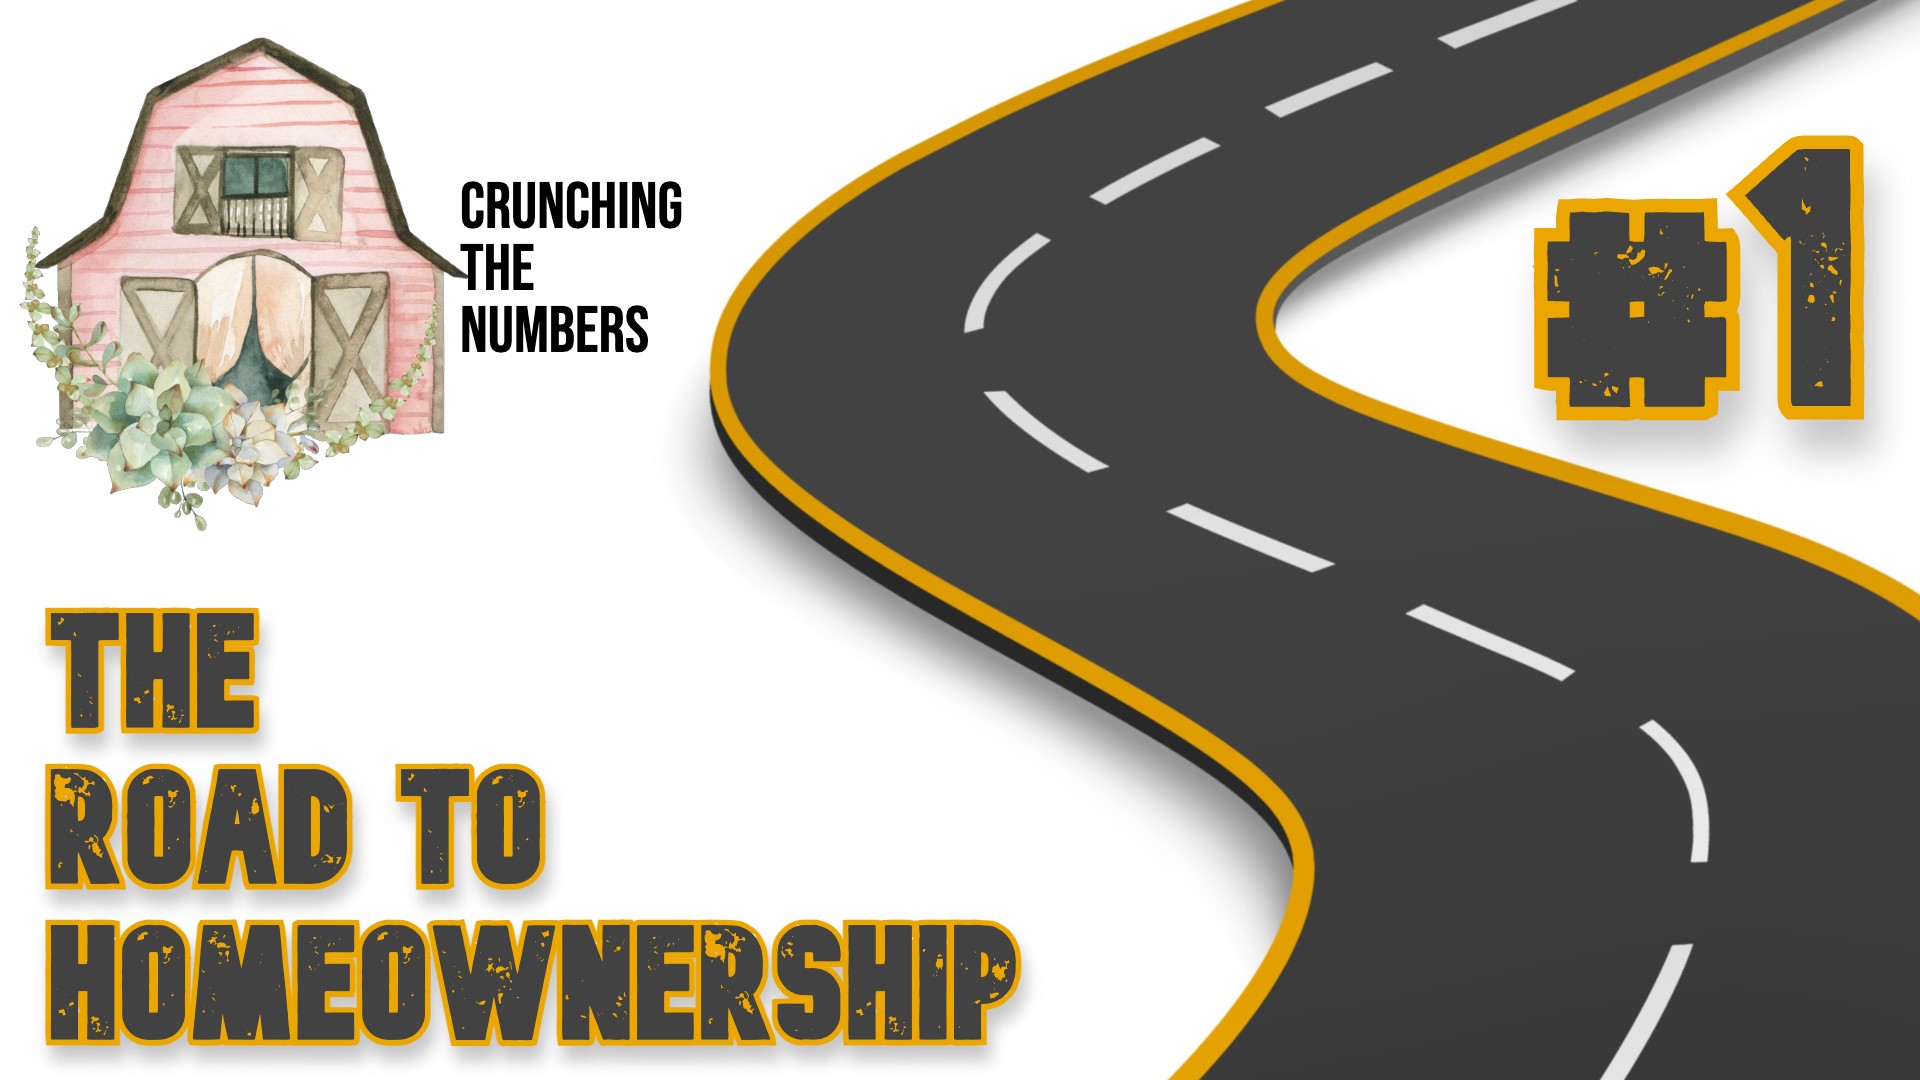 The Road to Homeownership #1: Crunching the Numbers